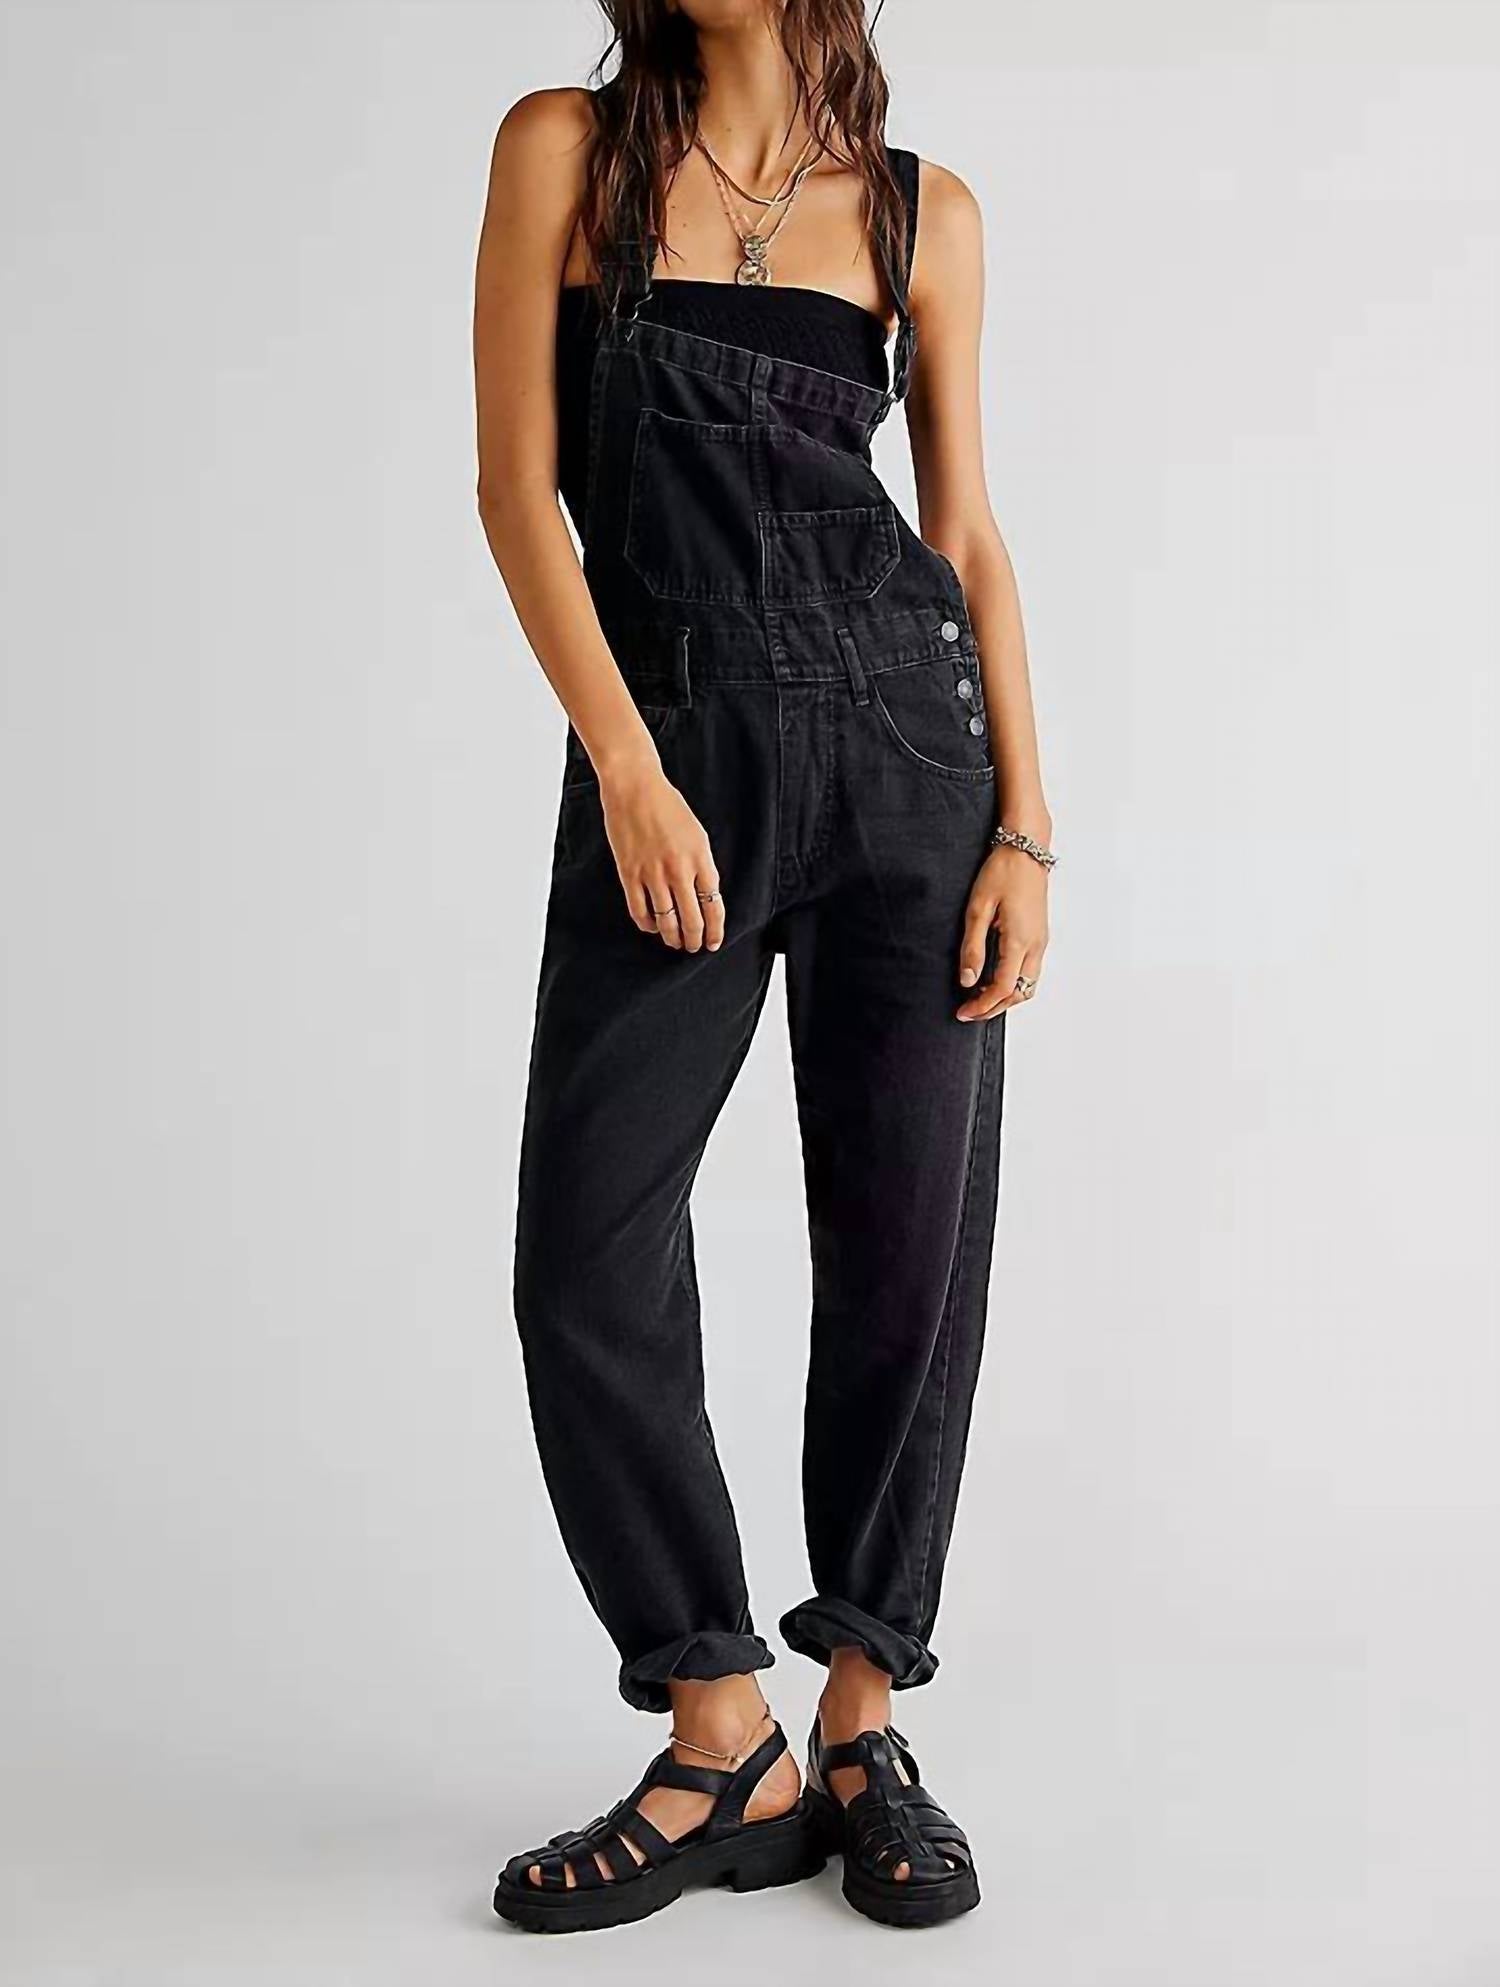 FREE PEOPLE Ziggy Denim Overall in Mineral Black